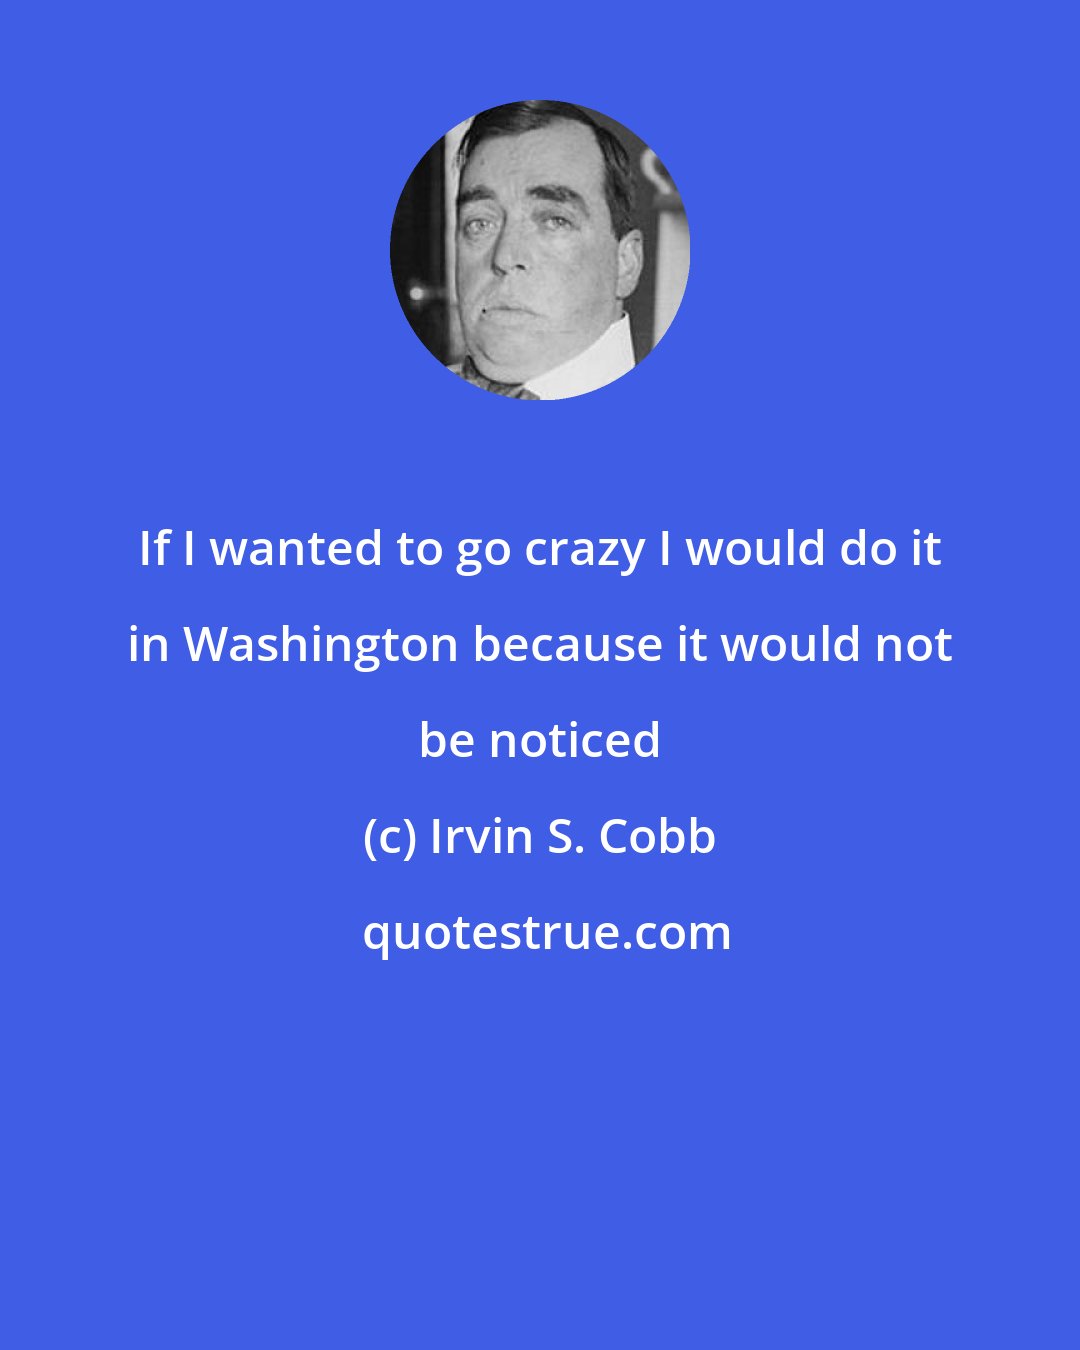 Irvin S. Cobb: If I wanted to go crazy I would do it in Washington because it would not be noticed